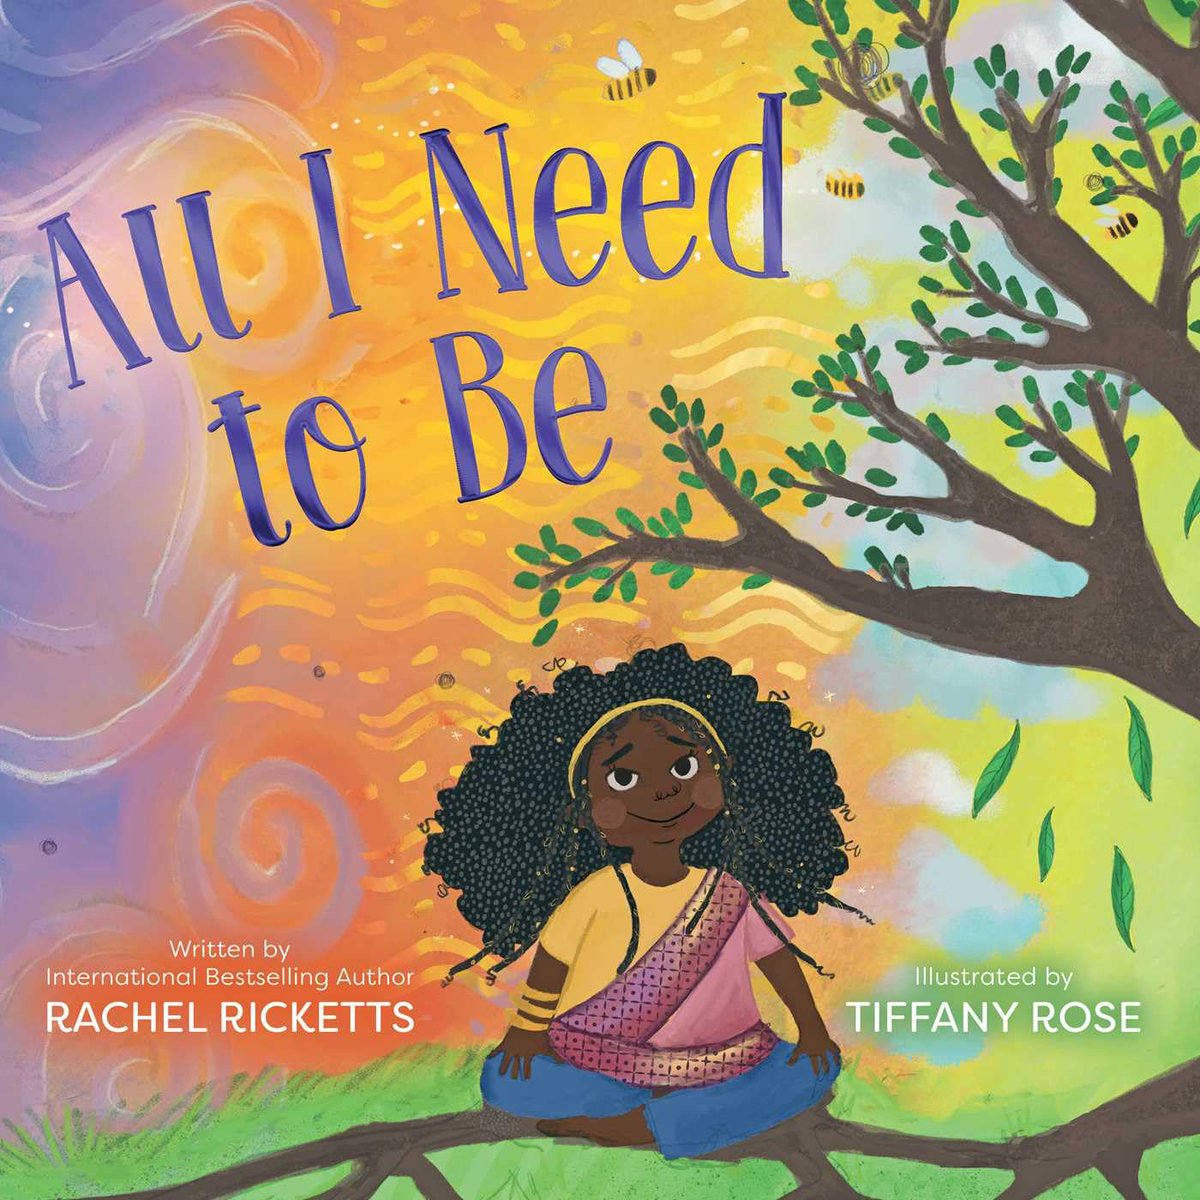 🎉🙌🏿Happy #BookBirthday🙌🏿🎉 📖ALL I NEED TO BE by Rachel Ricketts, Tiffany Rose, Simon & Schuster BYR CONGRATS! #OurStoriesMatter